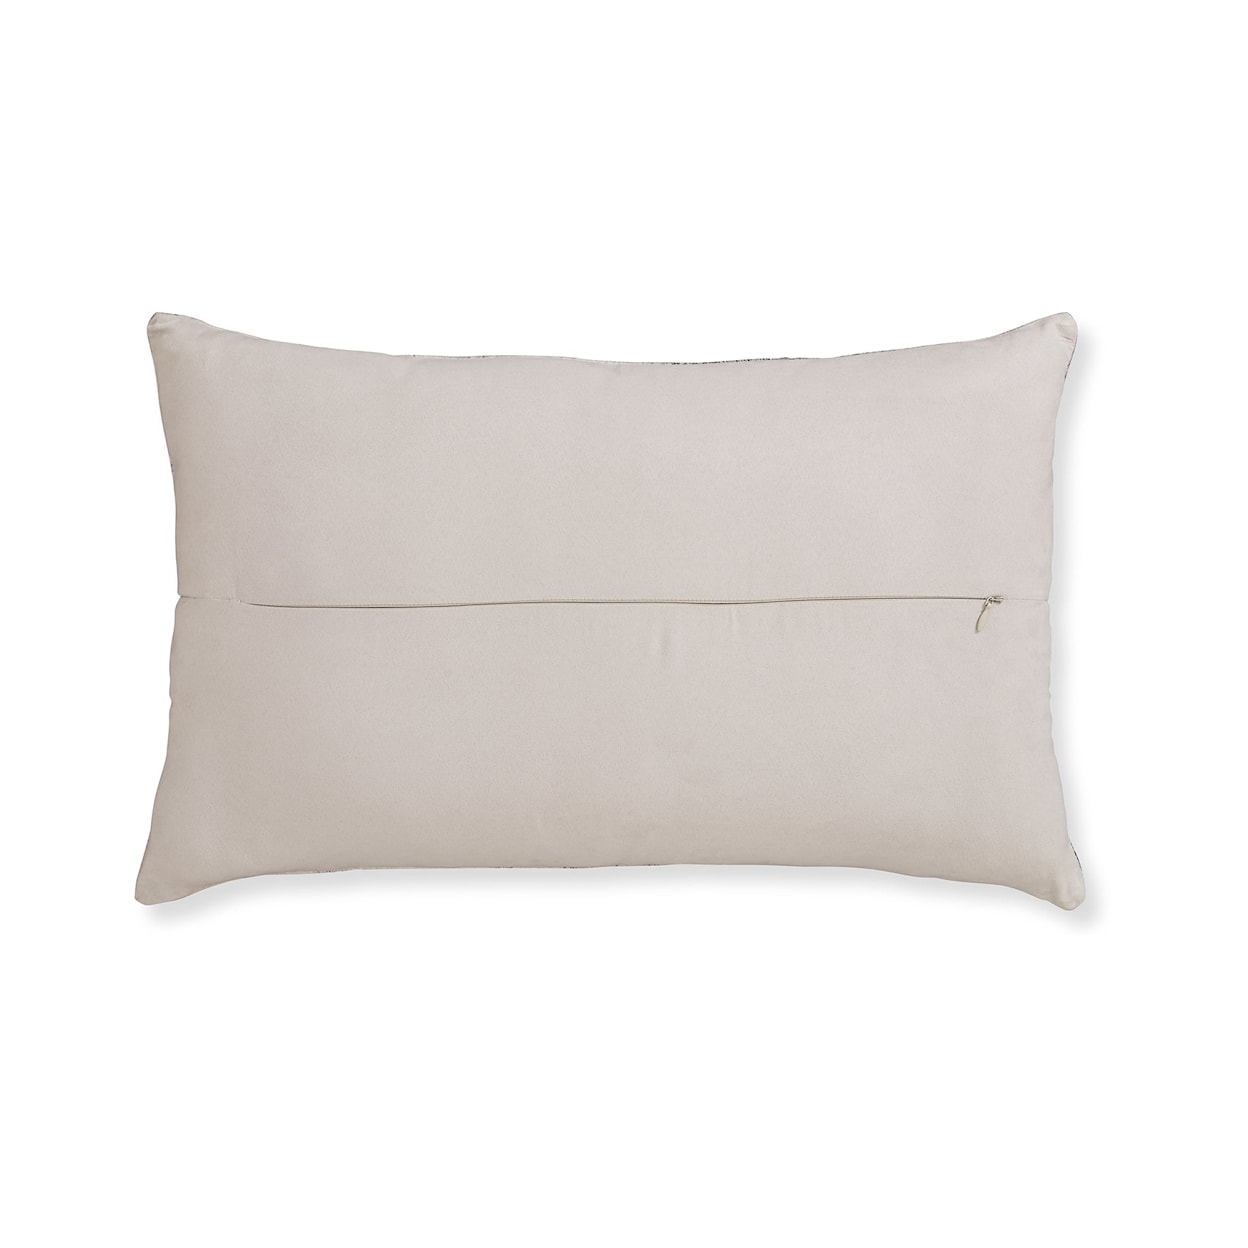 Benchcraft Pacrich Pillow (Set of 4)